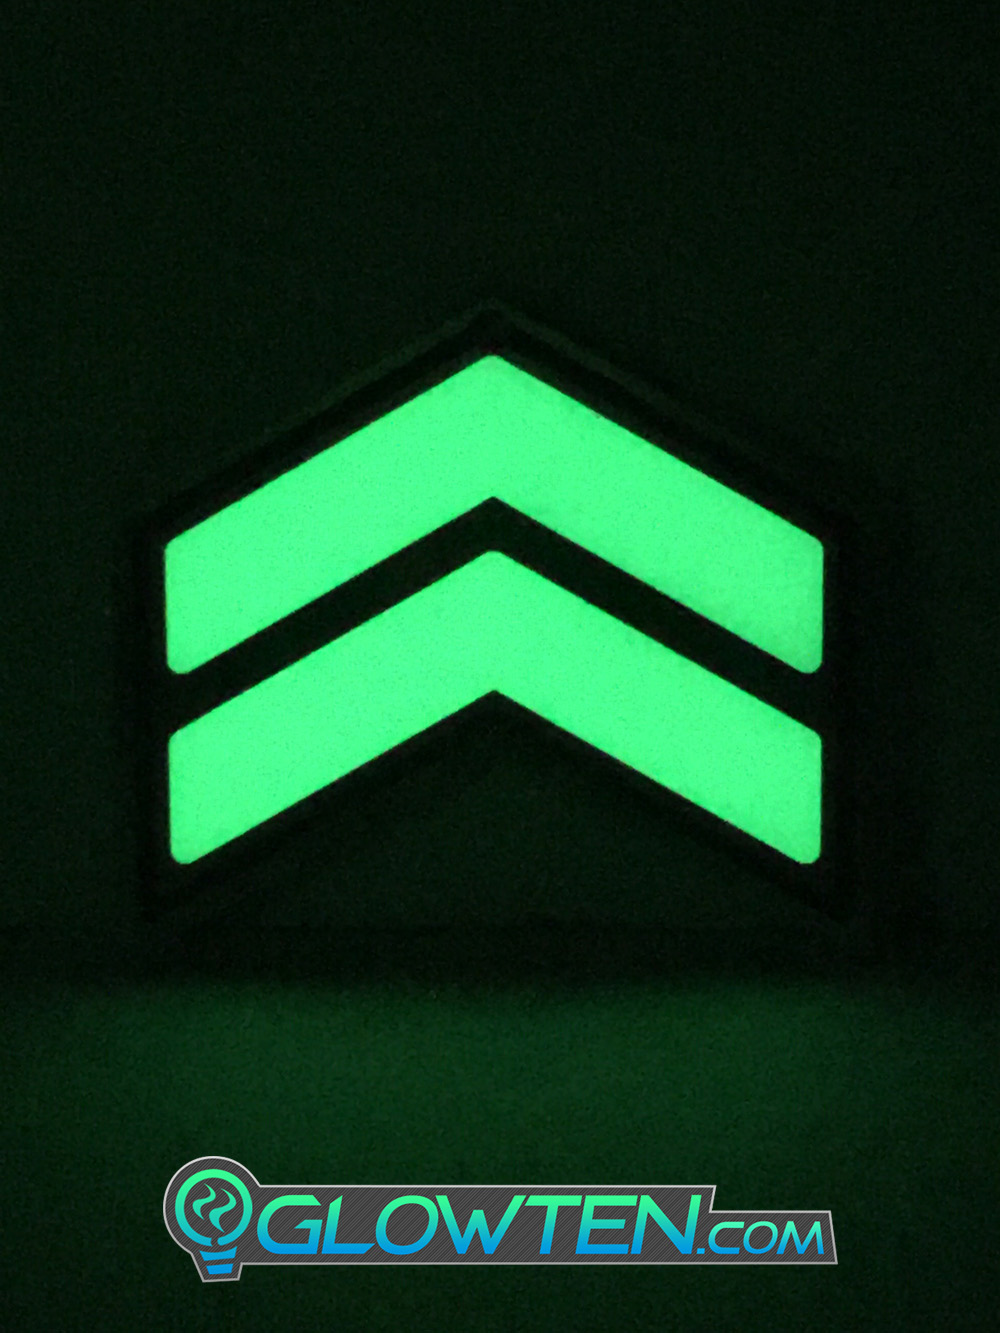 GLOWTEN.com - Seeing Assistance, Applications Stairs For Subways, Airports, Shopping Malls, Office Buildings, Factories, Cinemas, Stadiums, Dark Alley Ways Glow in the Dark Stairs Direction Guide Sign TWO ARROWS Pointer Photoluminescent Stainless Steel Green Glow picture photo cap preview pic image search 2